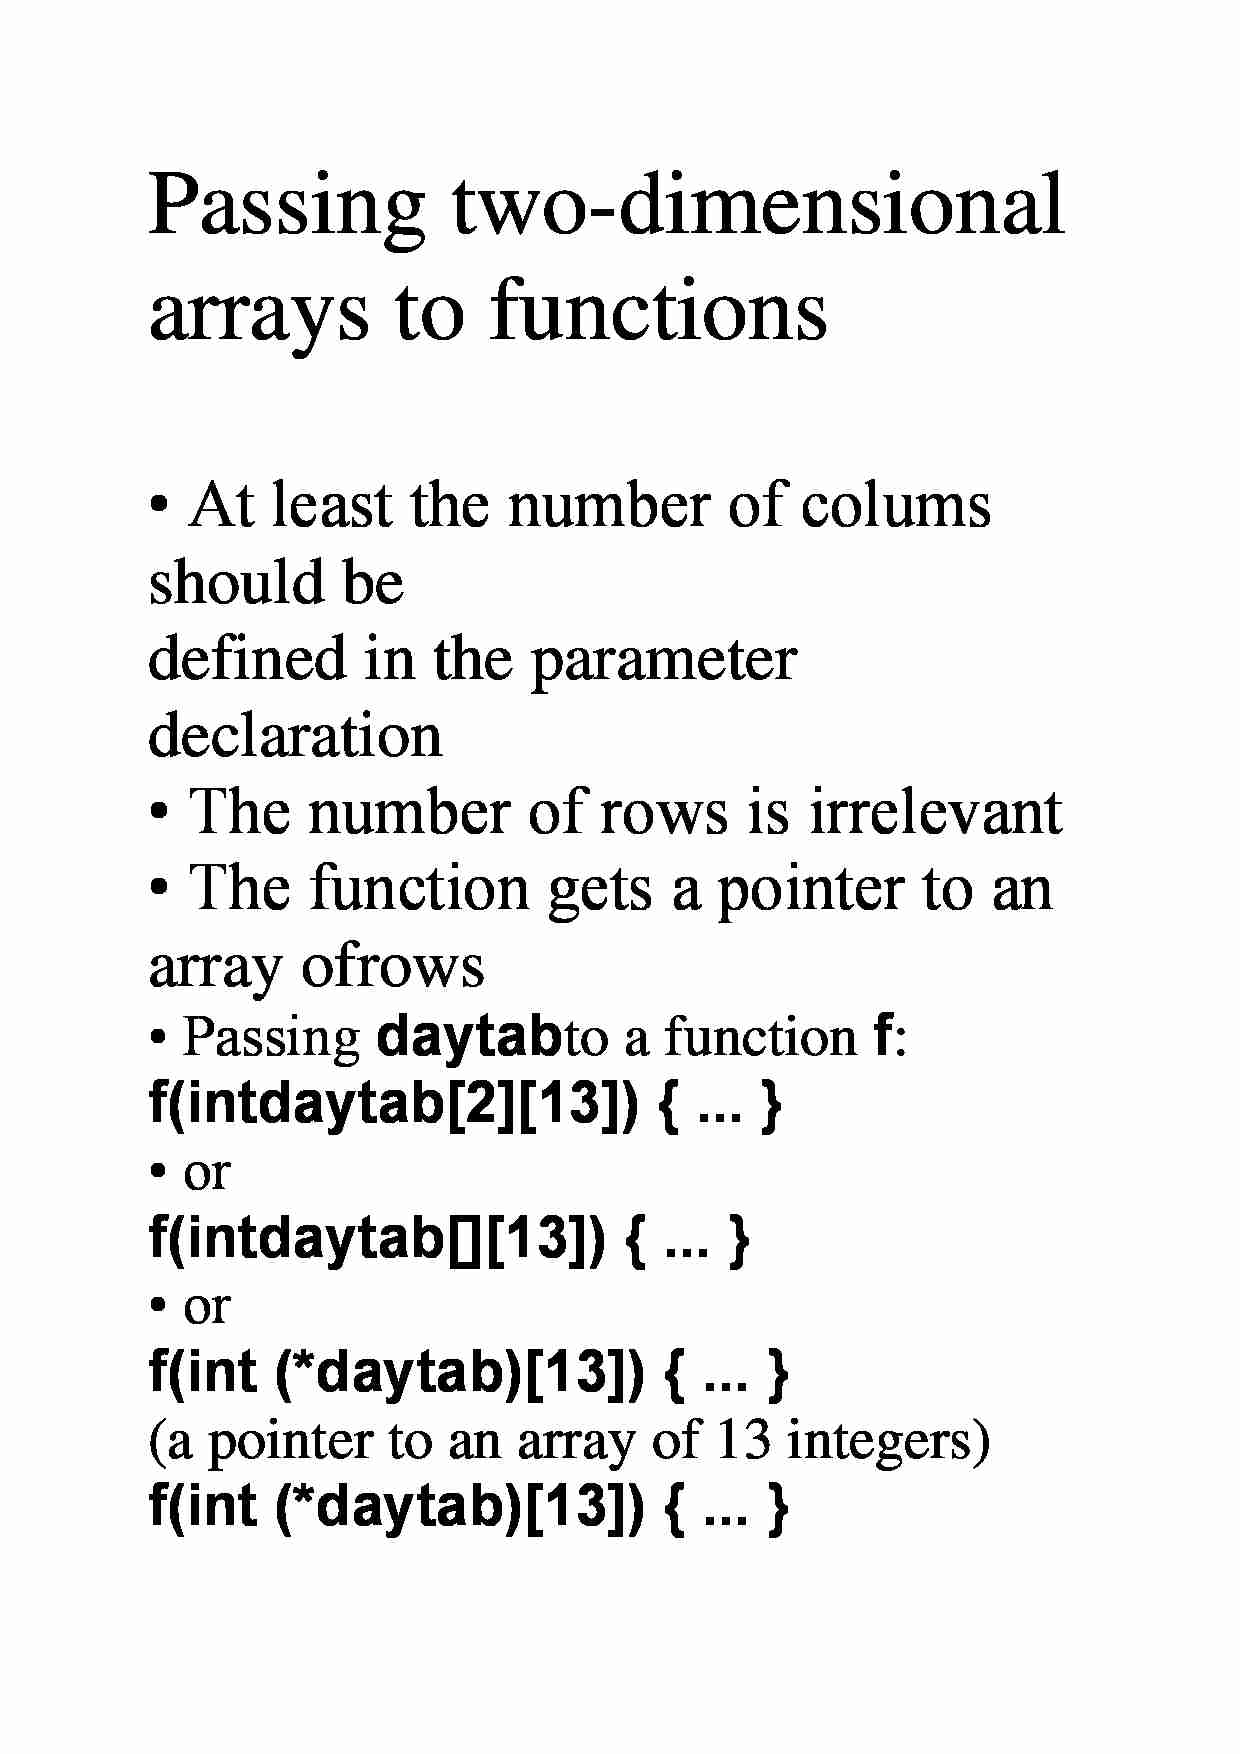 Passing two dimensional arrays to functions - strona 1